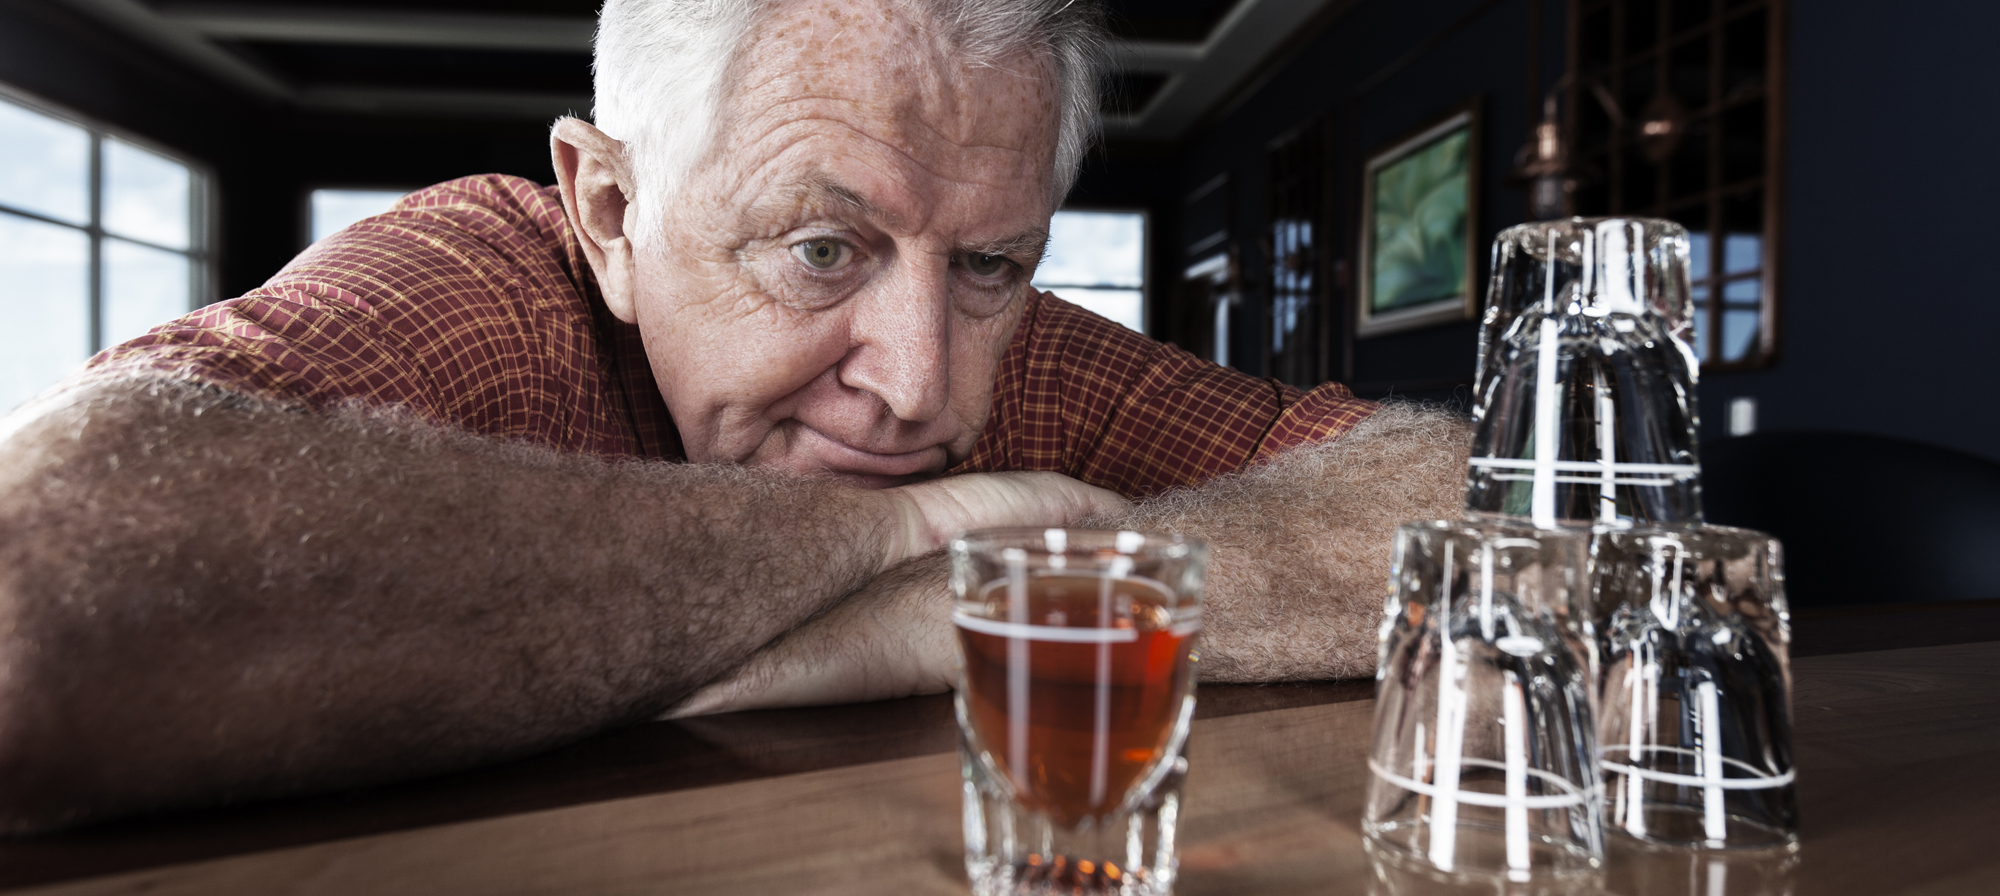 You May Be More Sensitive to Alcohol as You Age